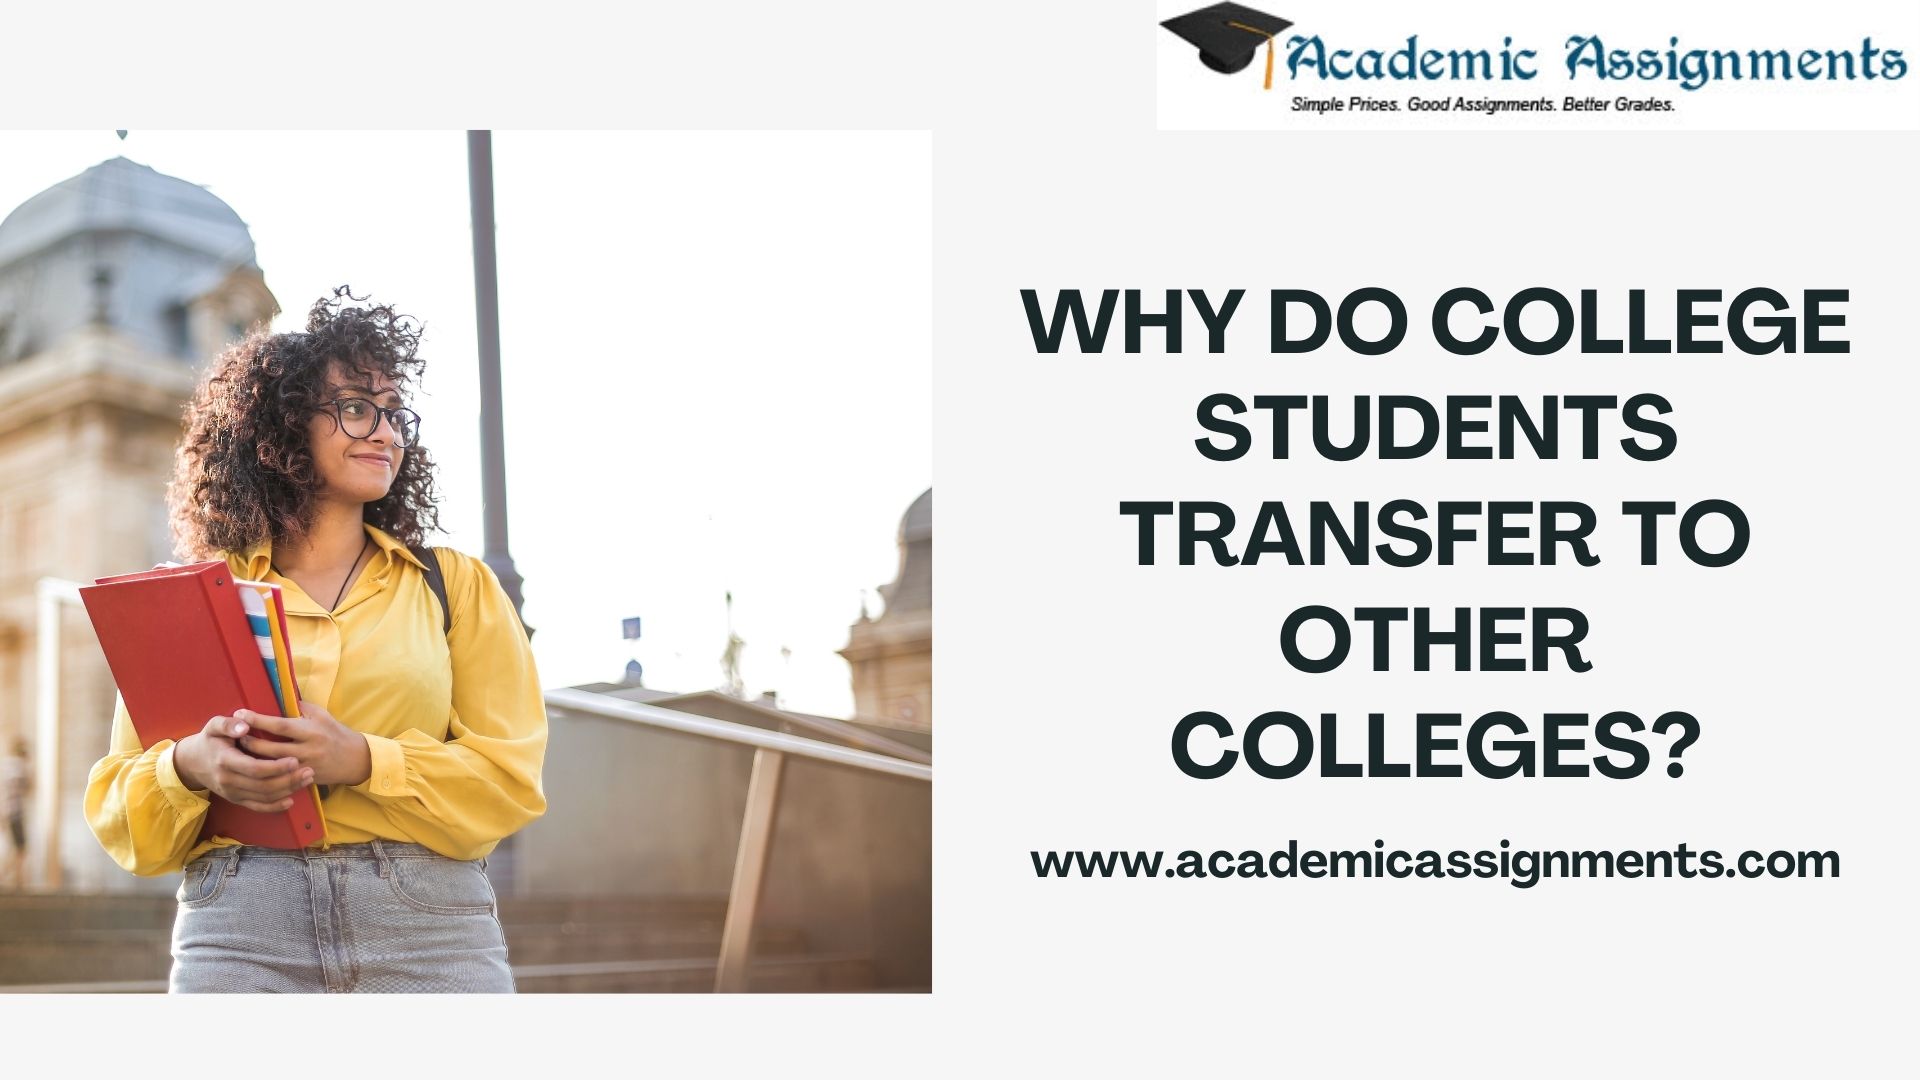 WHY DO COLLEGE STUDENTS TRANSFER TO OTHER COLLEGES